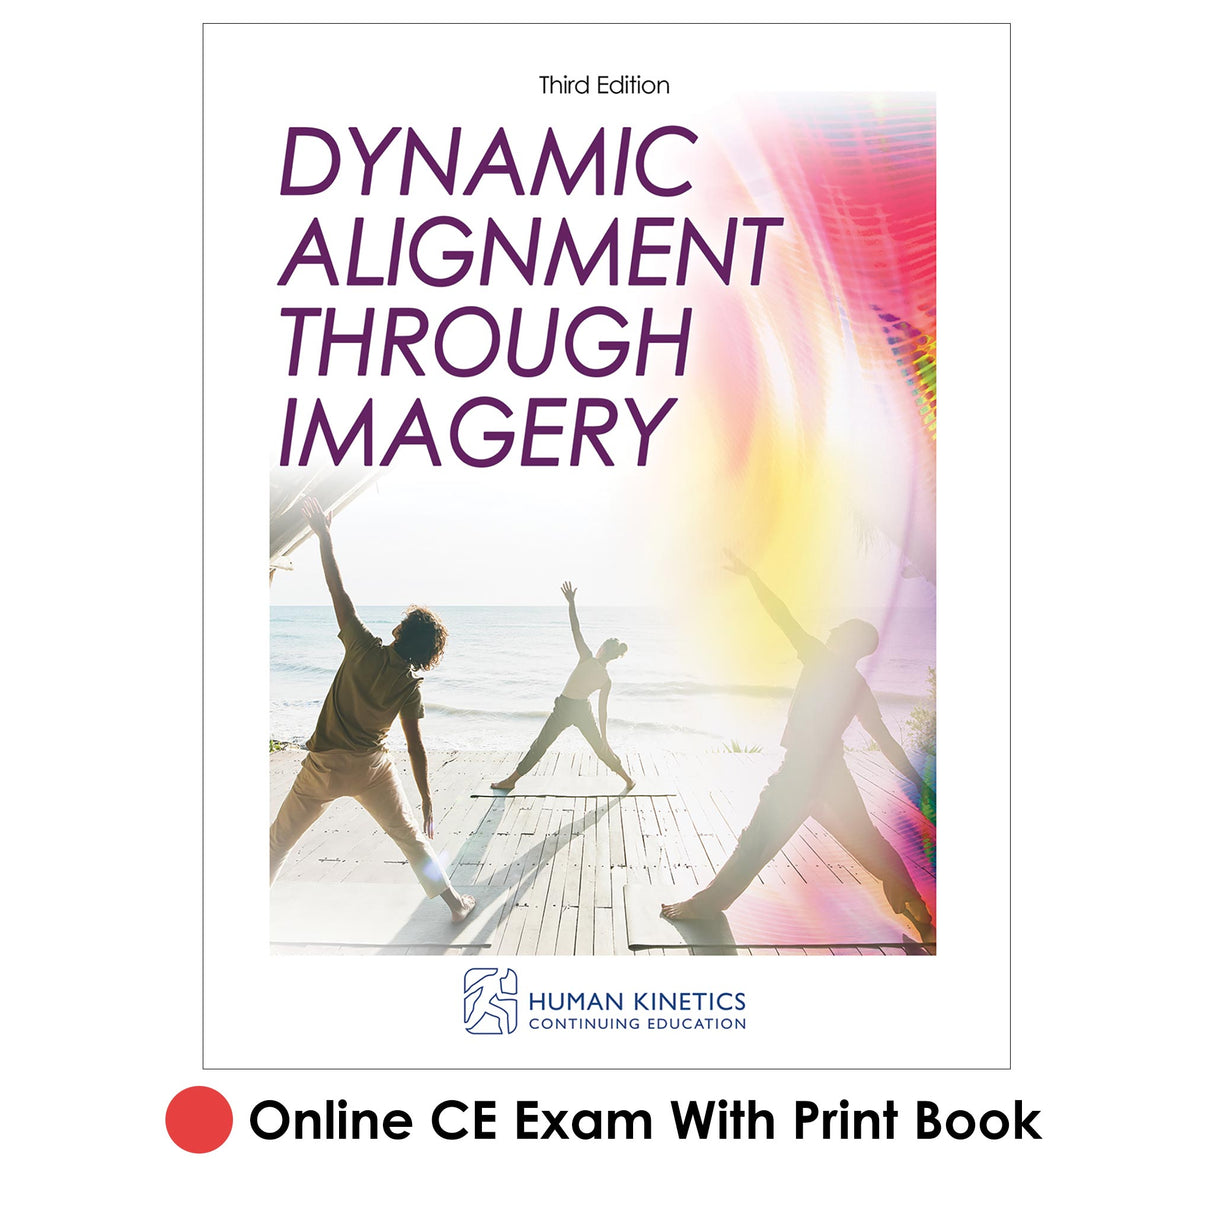 Dynamic Alignment Through Imagery 3rd Edition Online CE Exam With Print Book